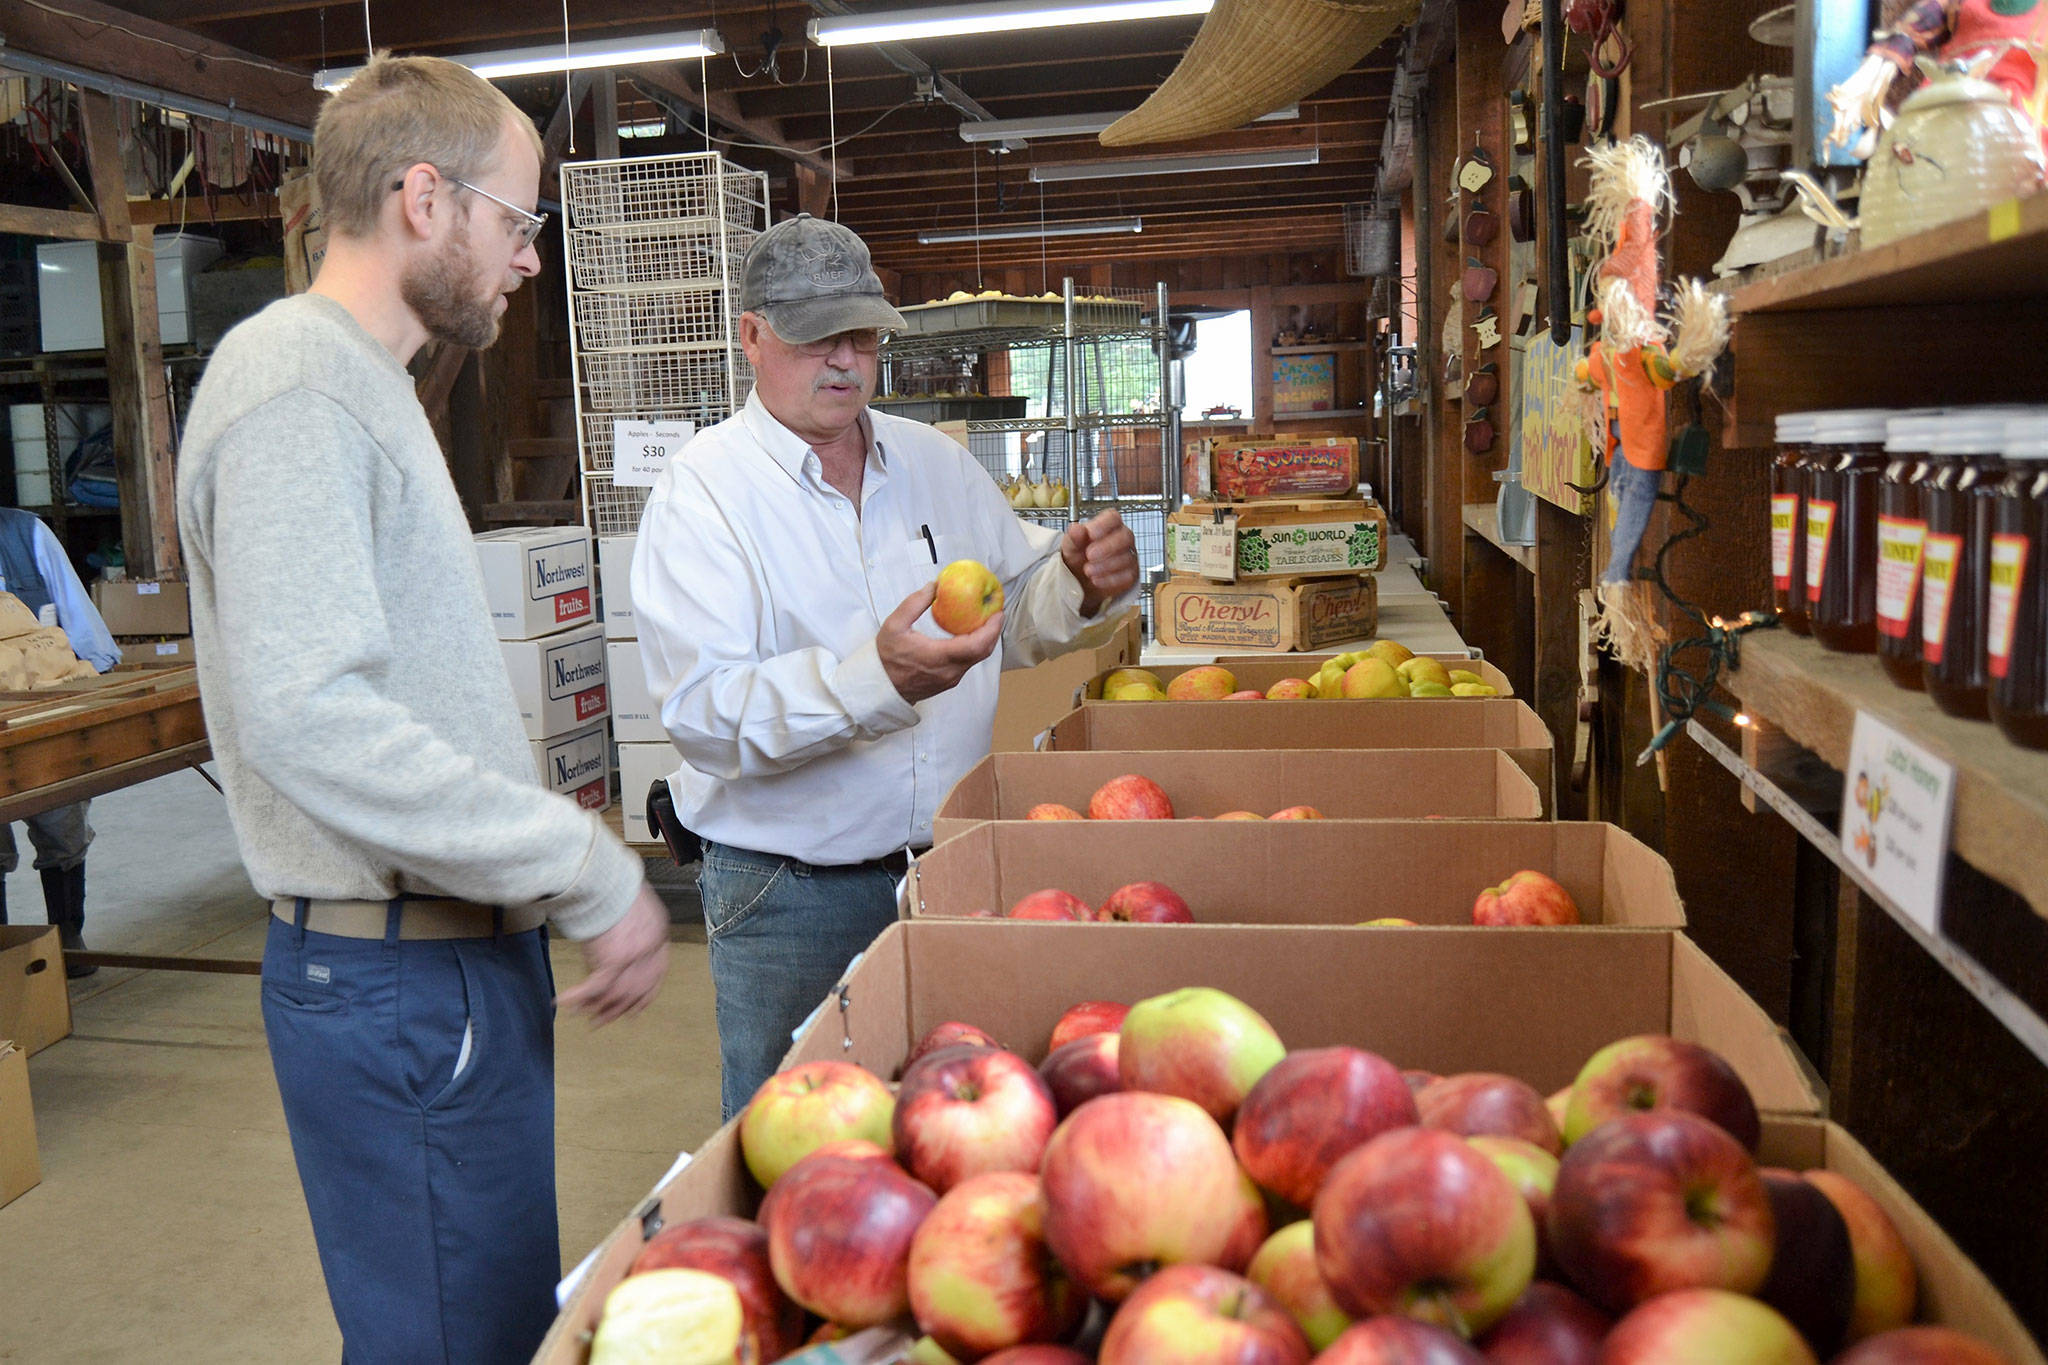 Steve Johnson, co-owner of Lazy J Tree Farm, on right talks apples with his neighbor Sven Bailey during the Clallam County Farm Tour. Sequim Gazette photo by Matthew Nash